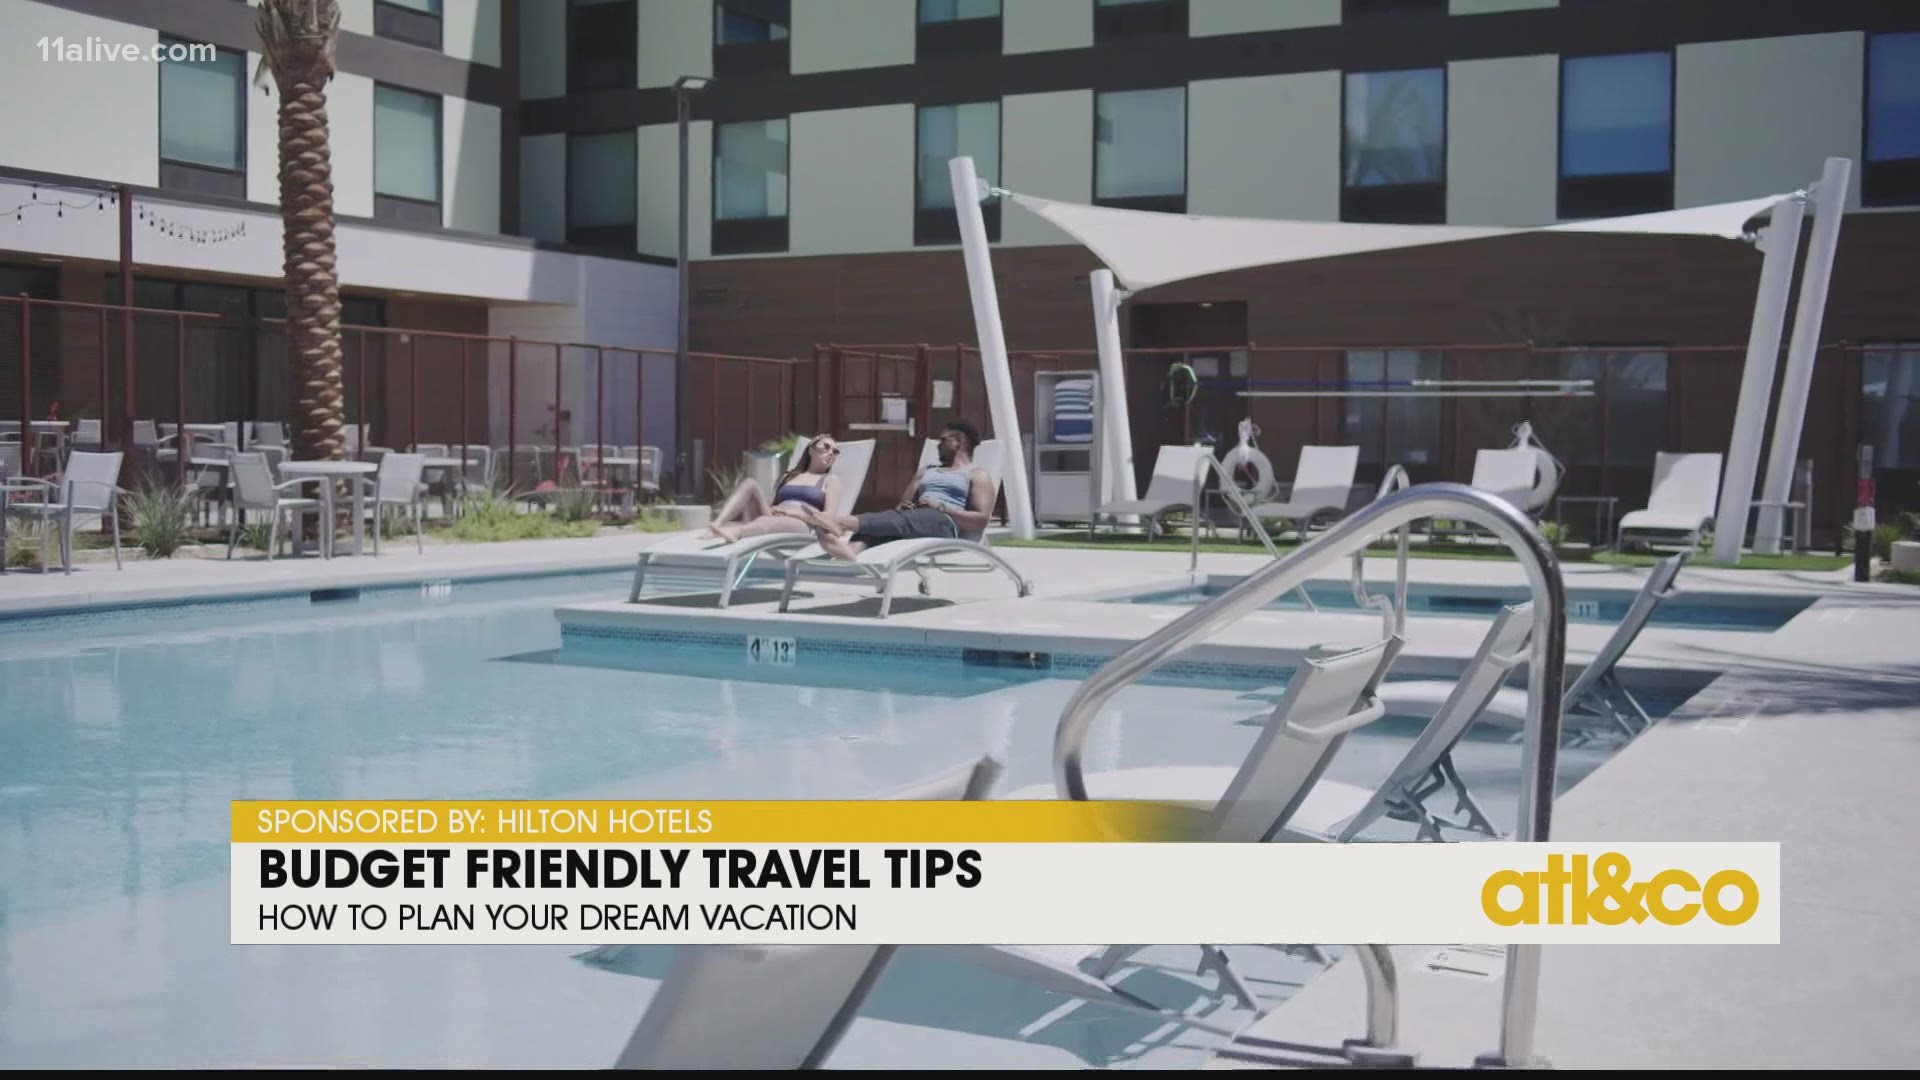 Hilton Hotels shares tips for planning your dream vacation.